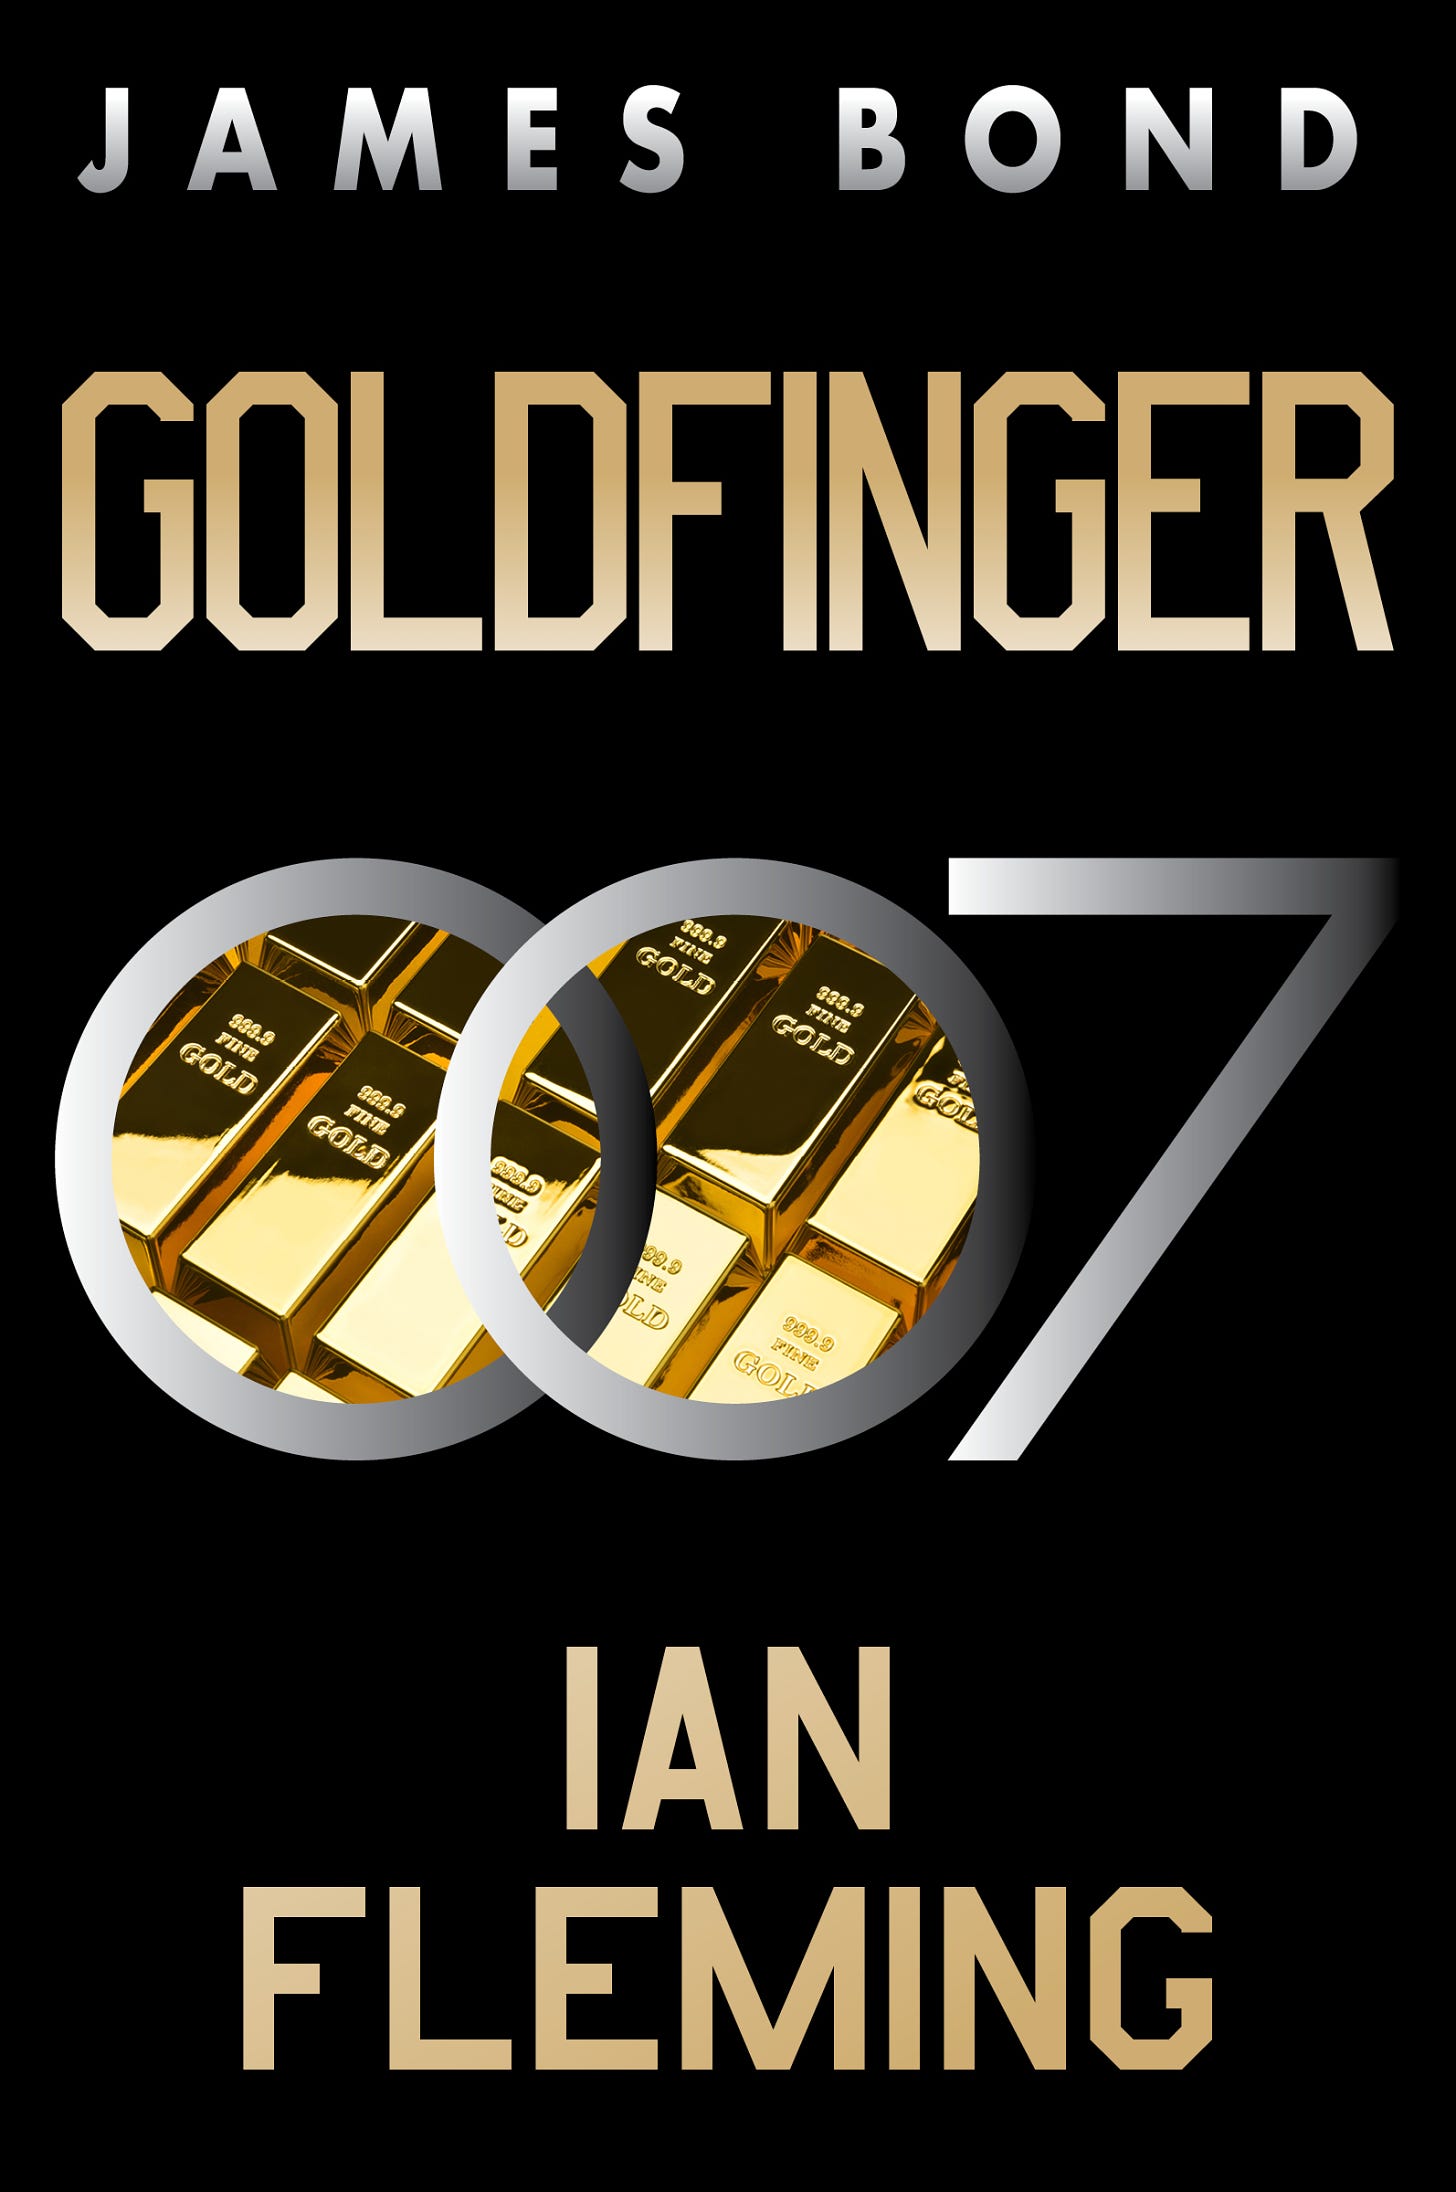 Goldfinger 70th Anniversary US Paperback Edition